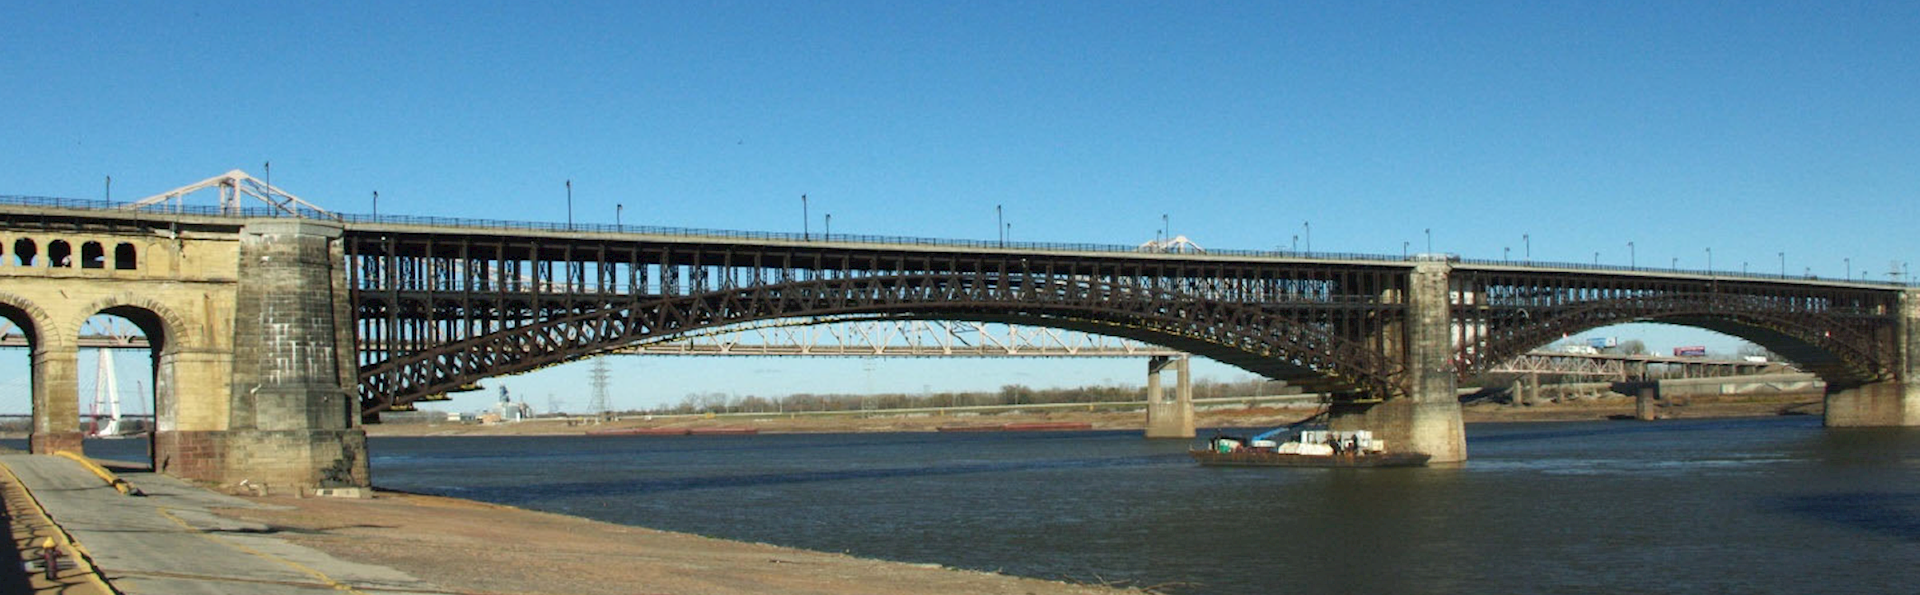 https://www.asce.org/-/media/asce-images-and-files/history-and-heritage/images/eads-bridge-feature.png?cx=0.42&cy=0.78&cw=1920&ch=595&hash=618D837FCFFD12E5BAF5AB03FA8E5D06